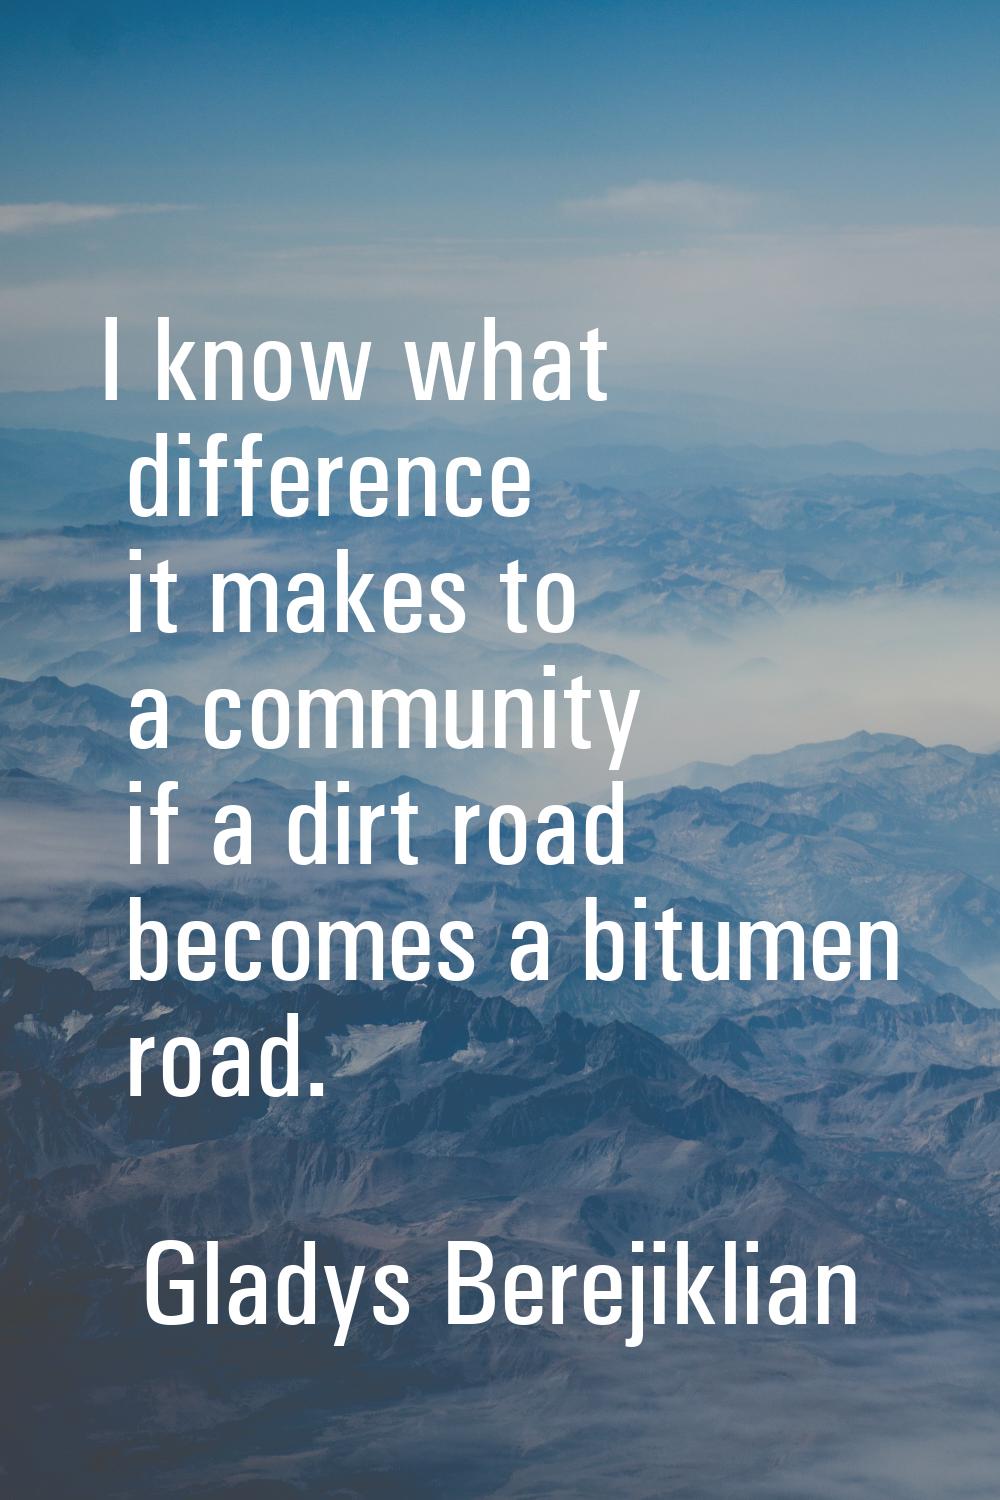 I know what difference it makes to a community if a dirt road becomes a bitumen road.